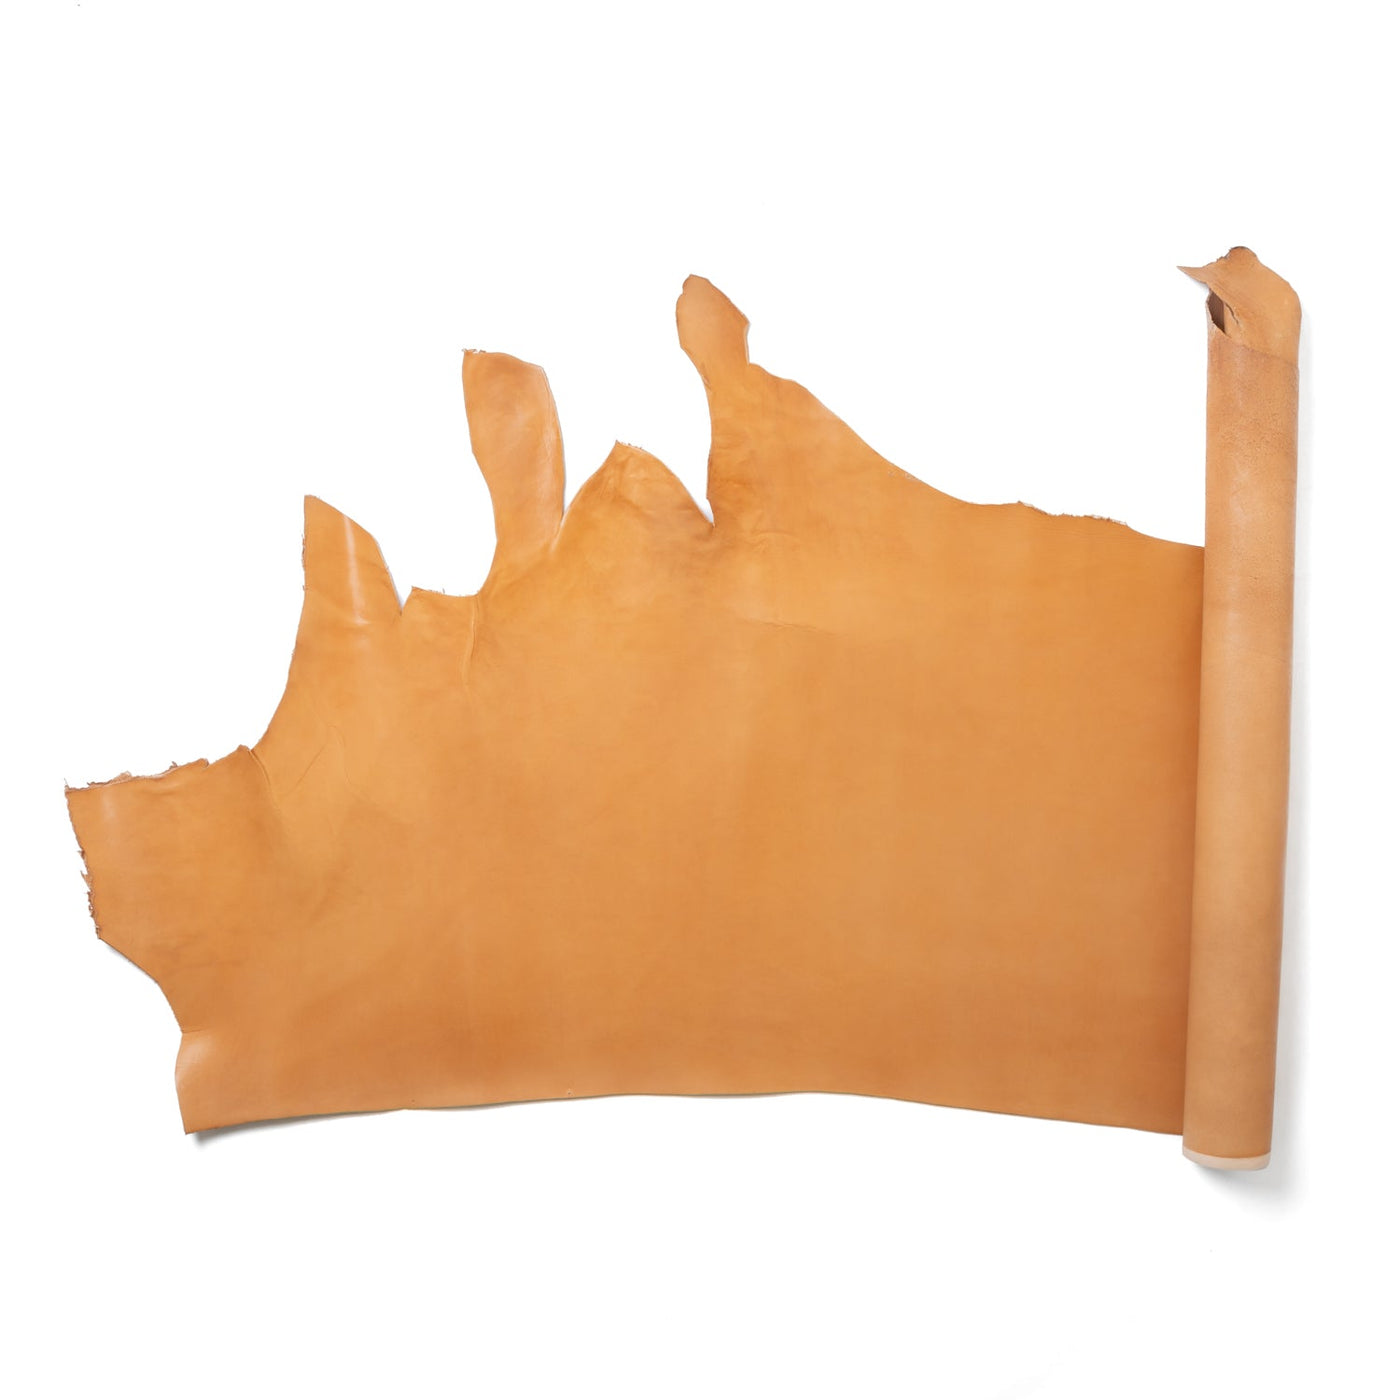 Tanned/smooth leather, half cut/natural